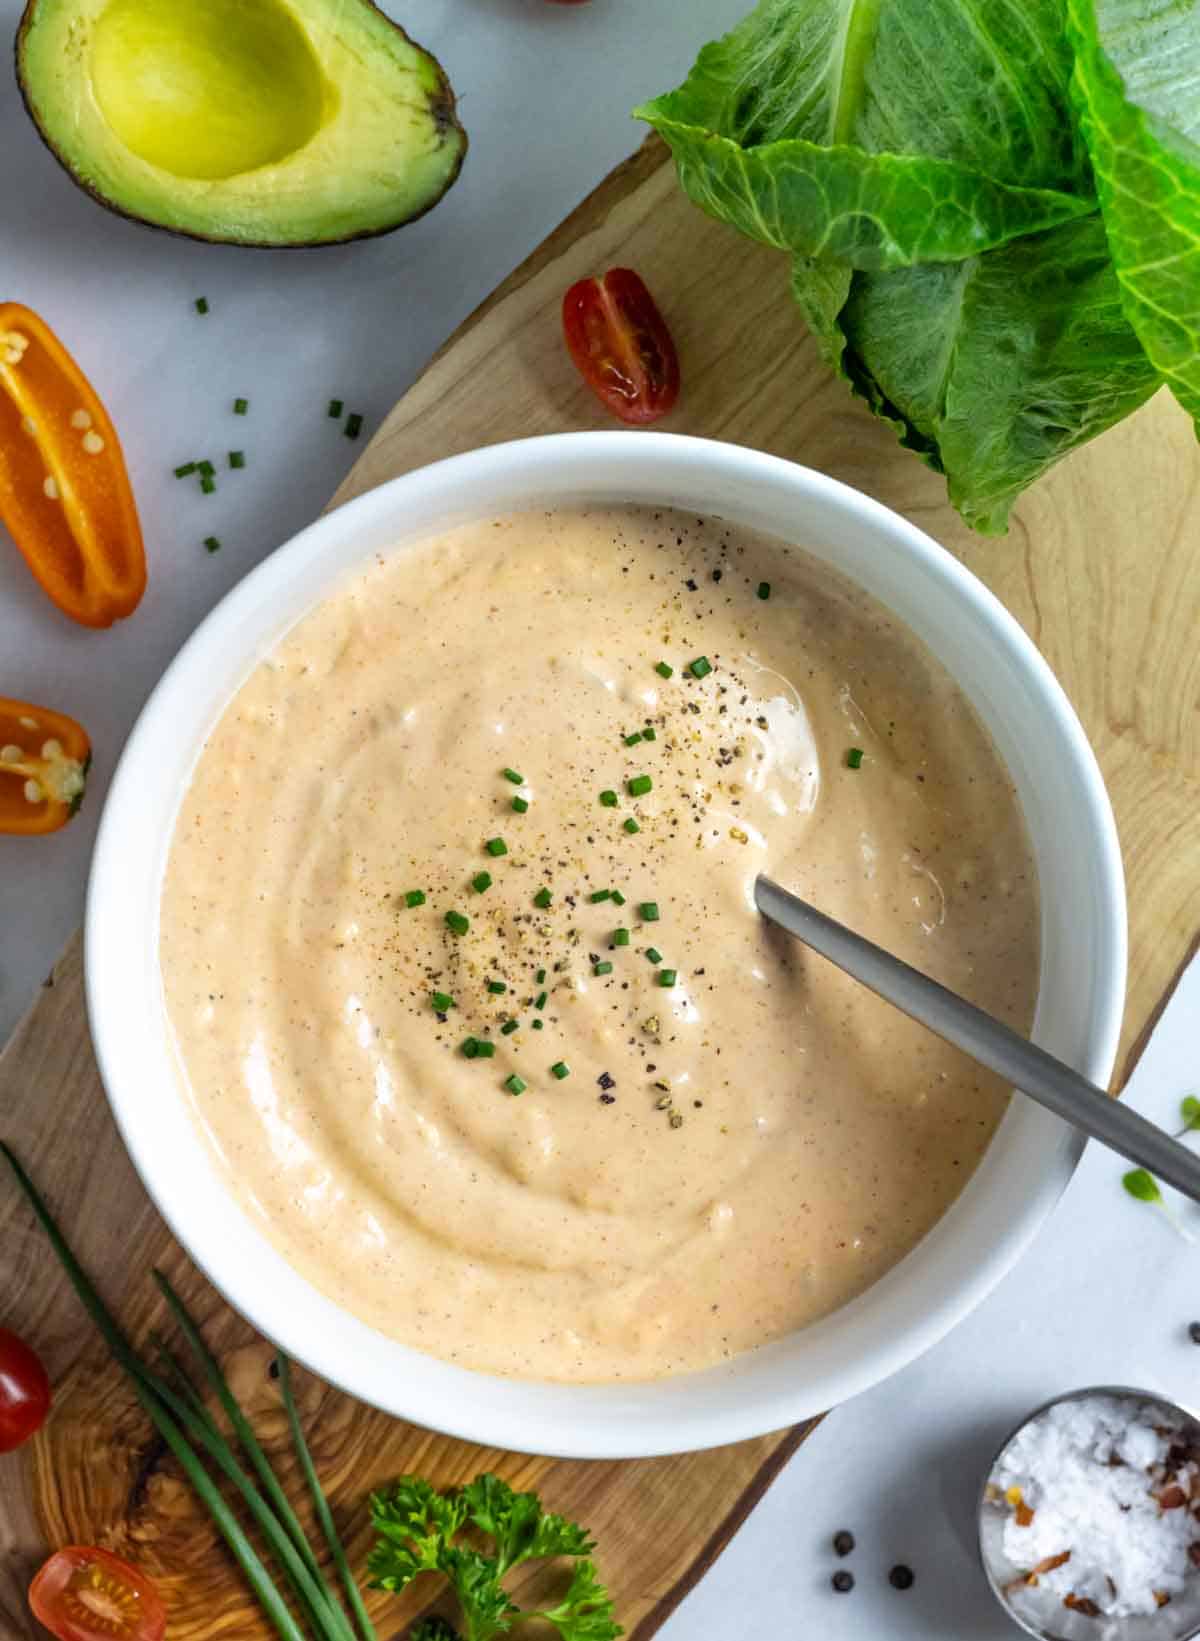 Dairy-free Thousand Island dressing in a white bowl with a spoon and topped with a sprinkle of fresh chives and black pepper.